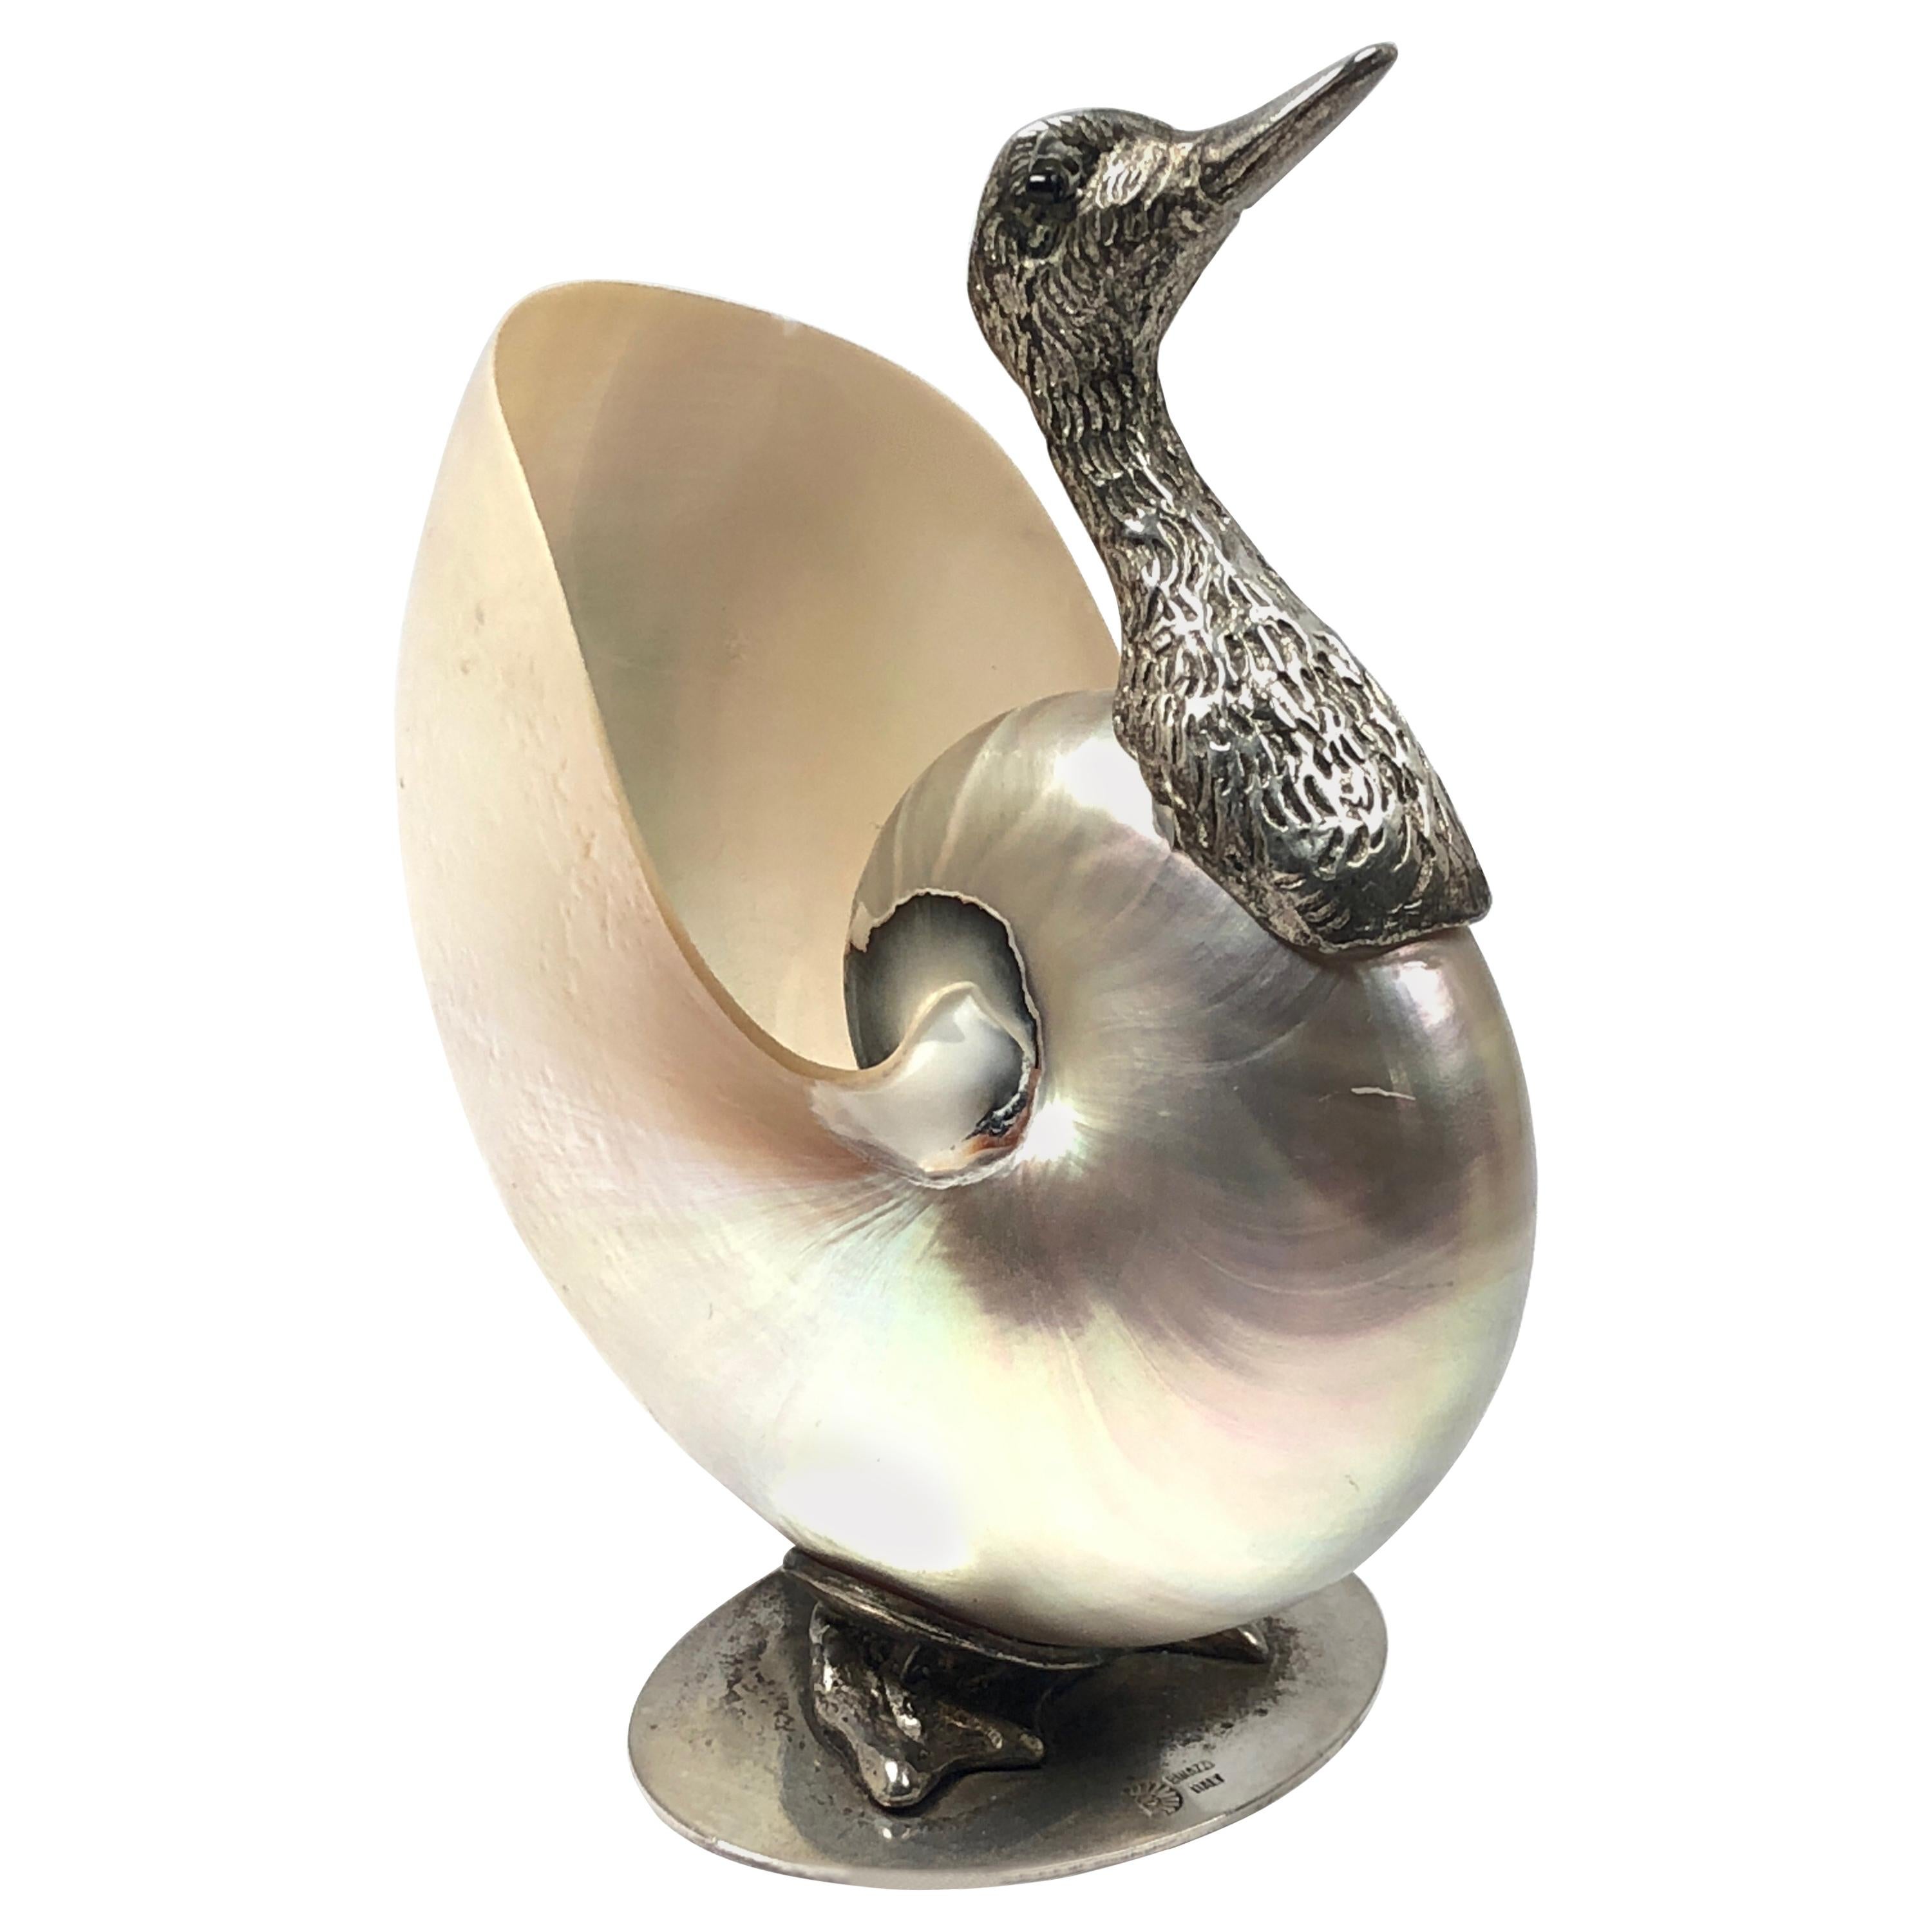 Rare Signed Binazzi Goose Shell Trinket Bowl Sculpture, 1970s, Italy For Sale